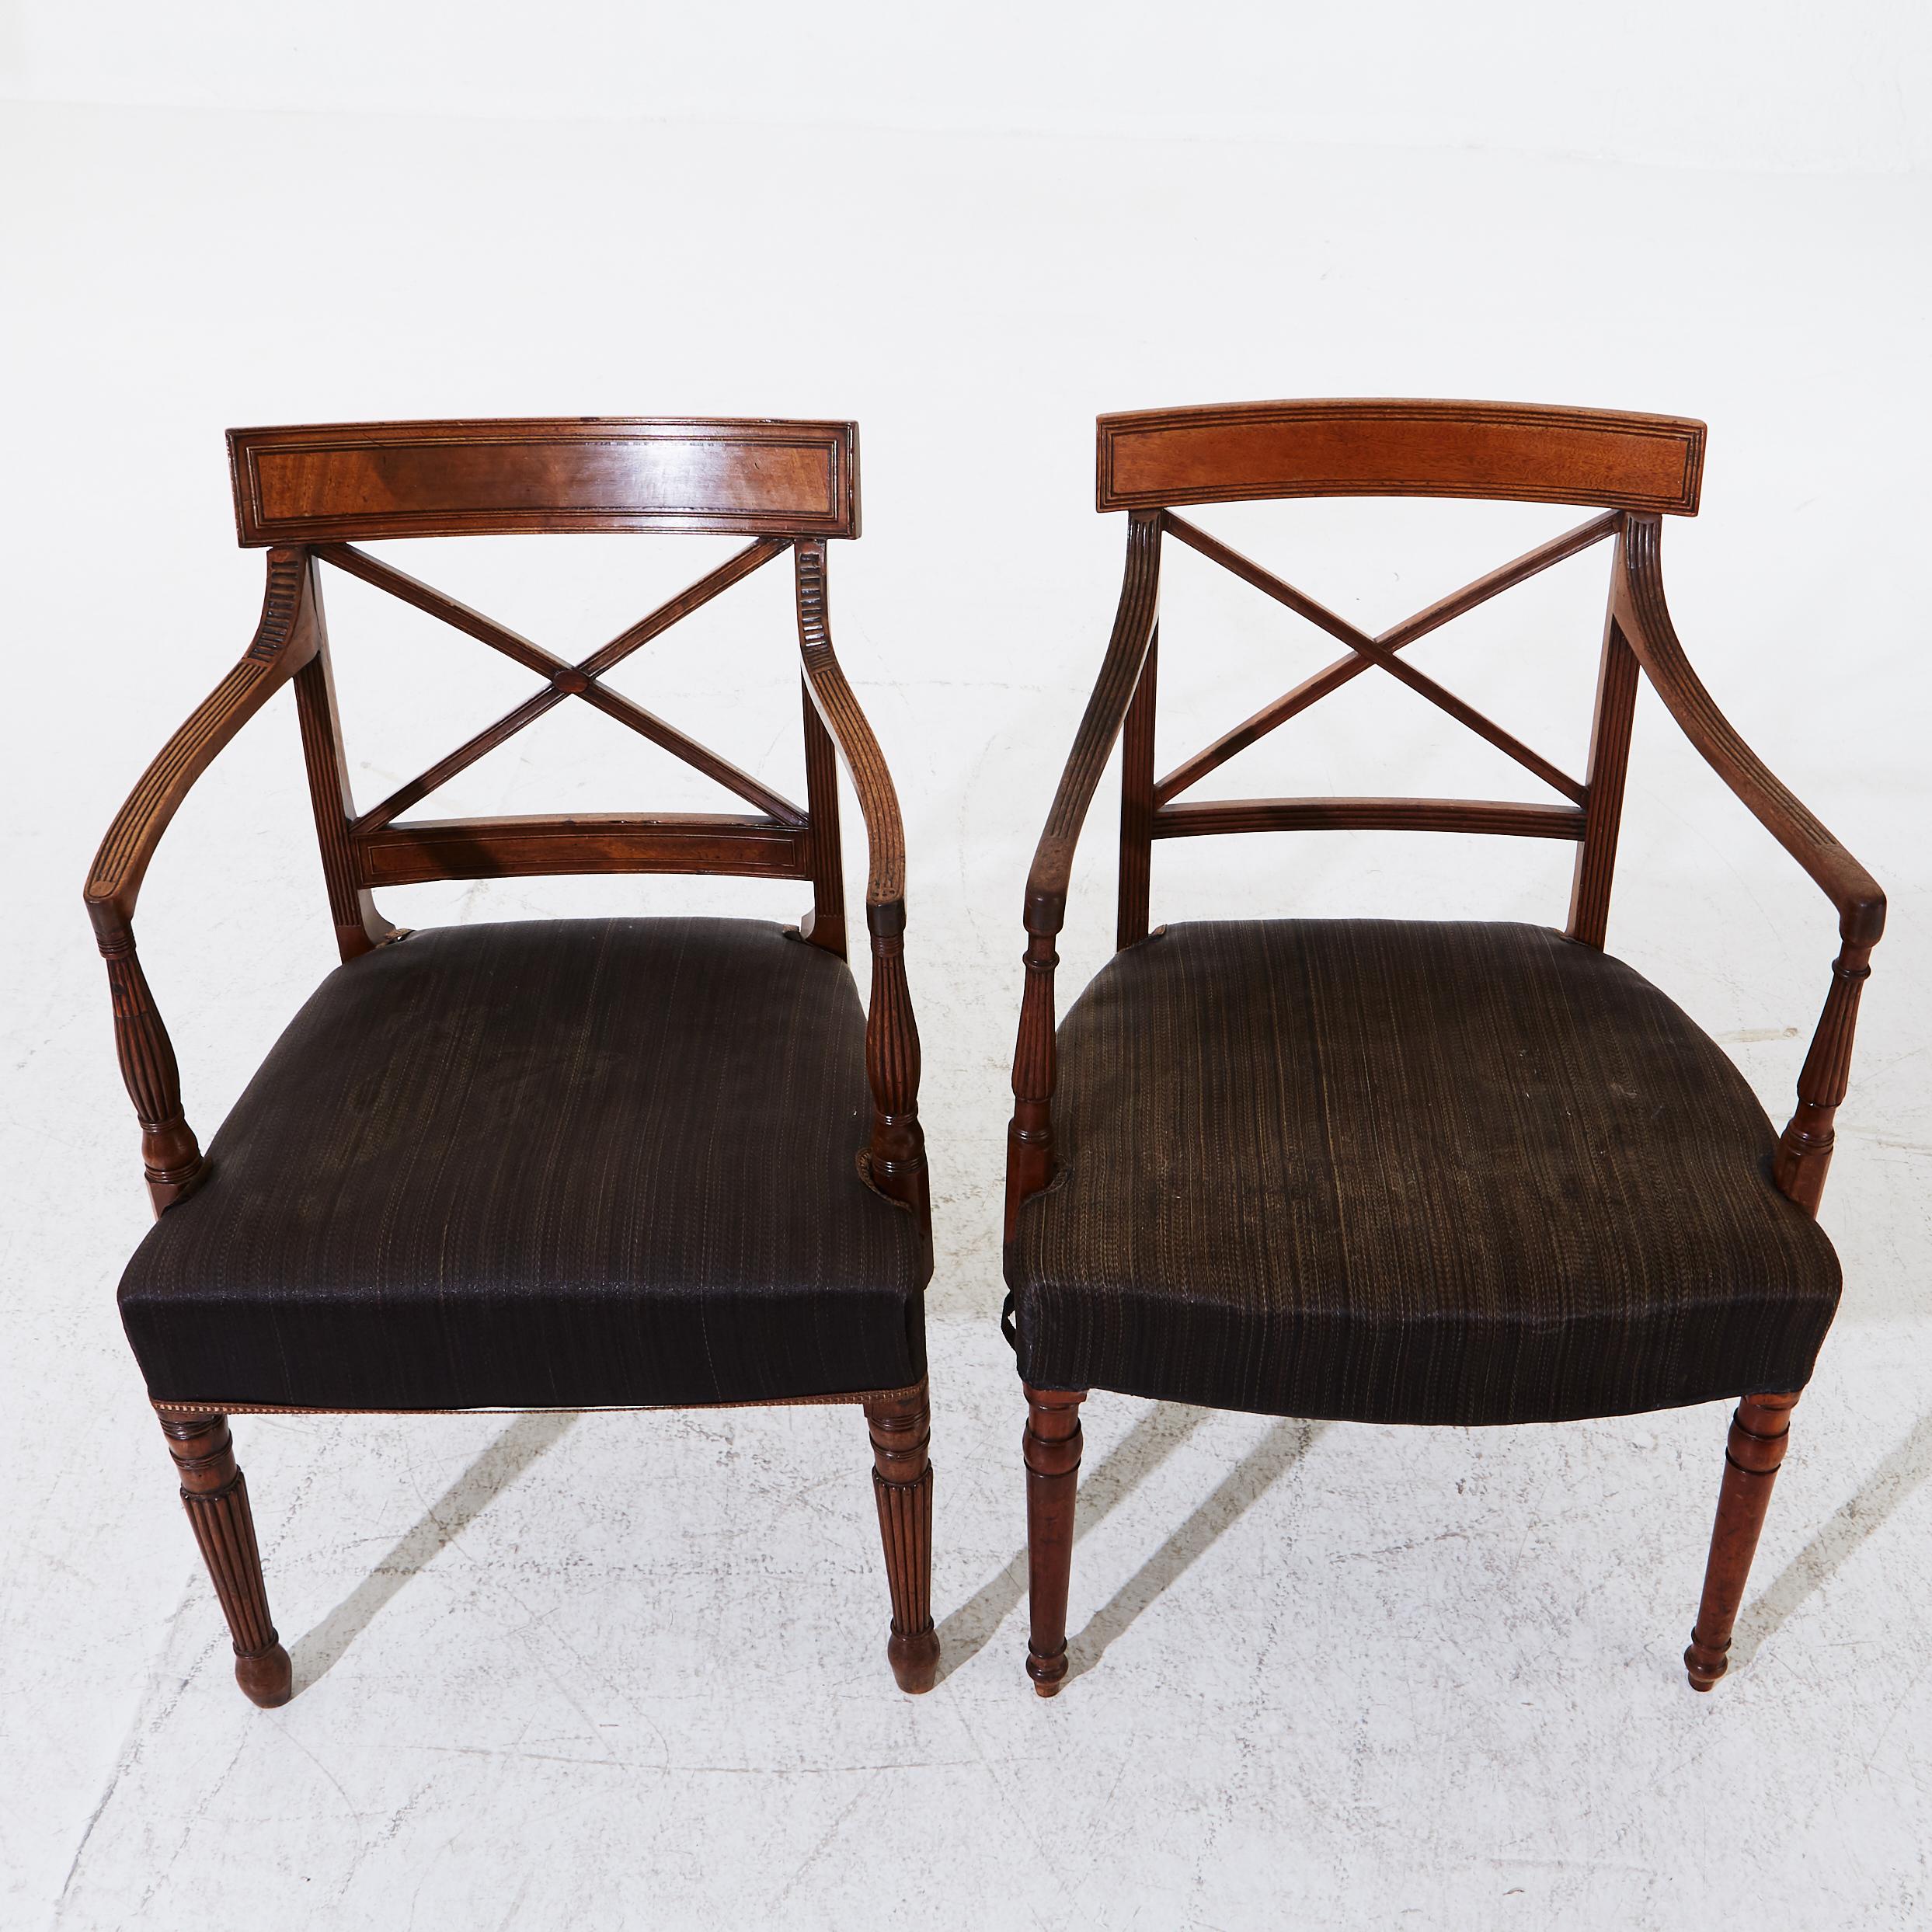 Two Regency era mahogany armchairs with horsehair upholstery
From England, early 1800s century. Gorgeous patina and very good structure and details. 
 
Measures: Seat height 17 in.


  